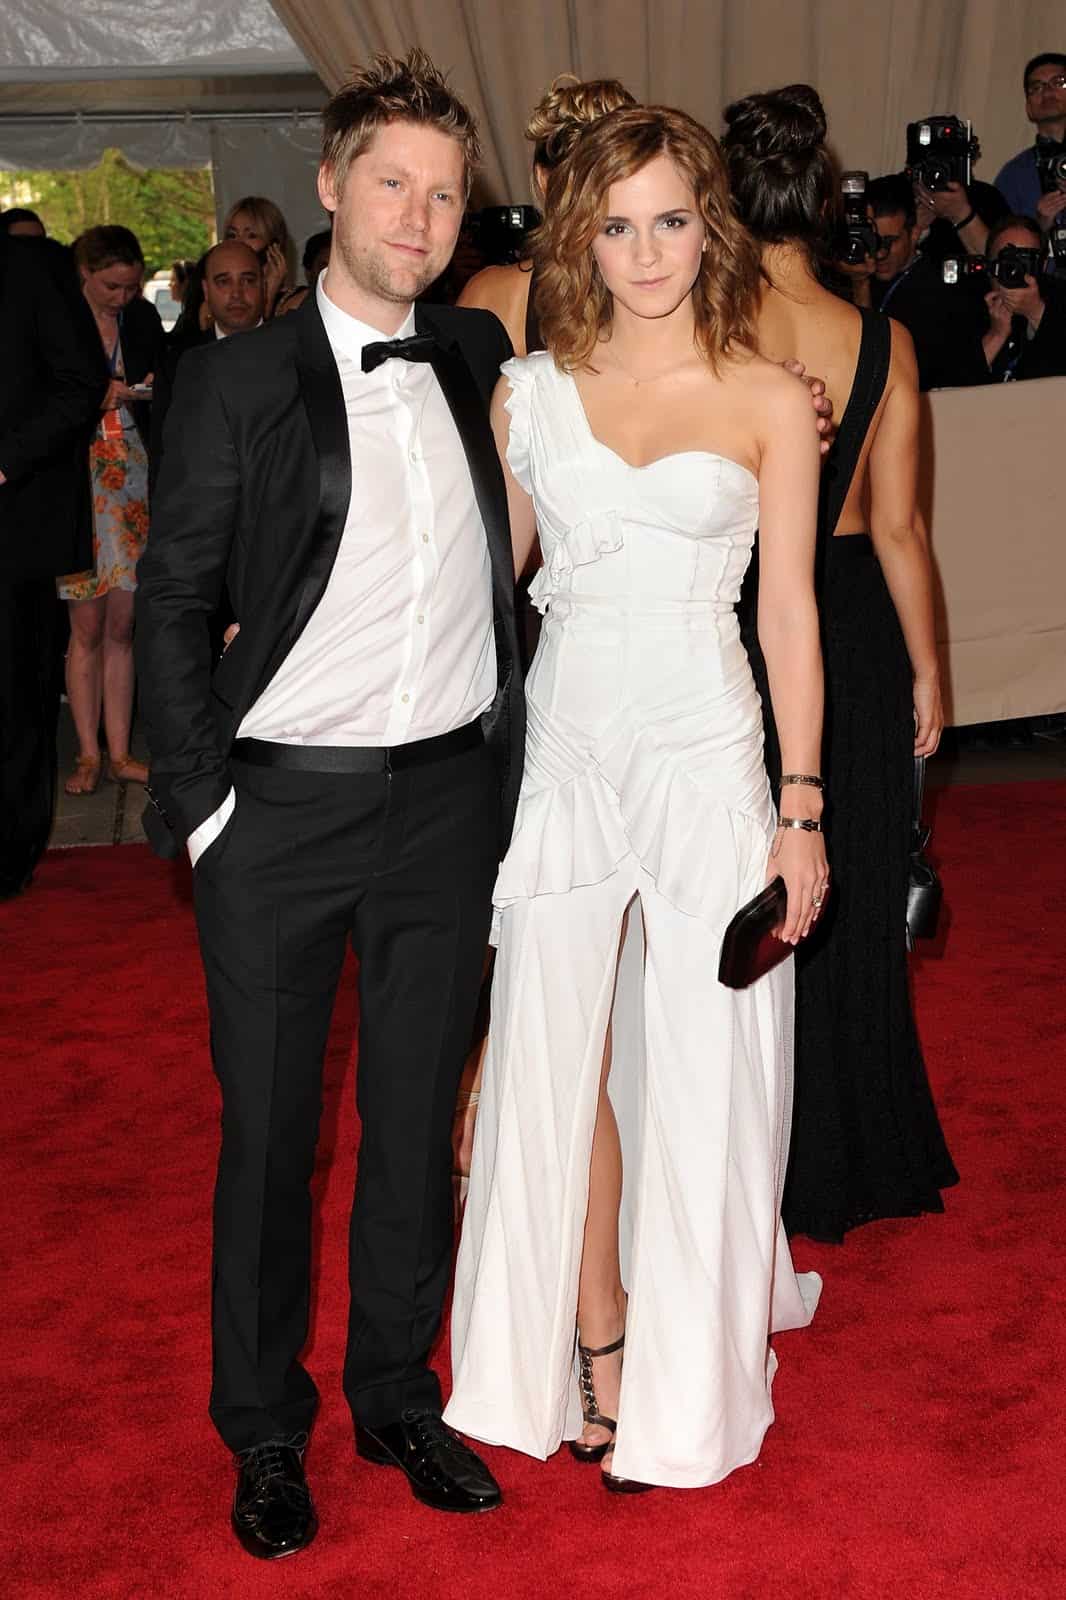 Emma Watson Wore a Stunning White One Shoulder Dress at the Met Gala in NY